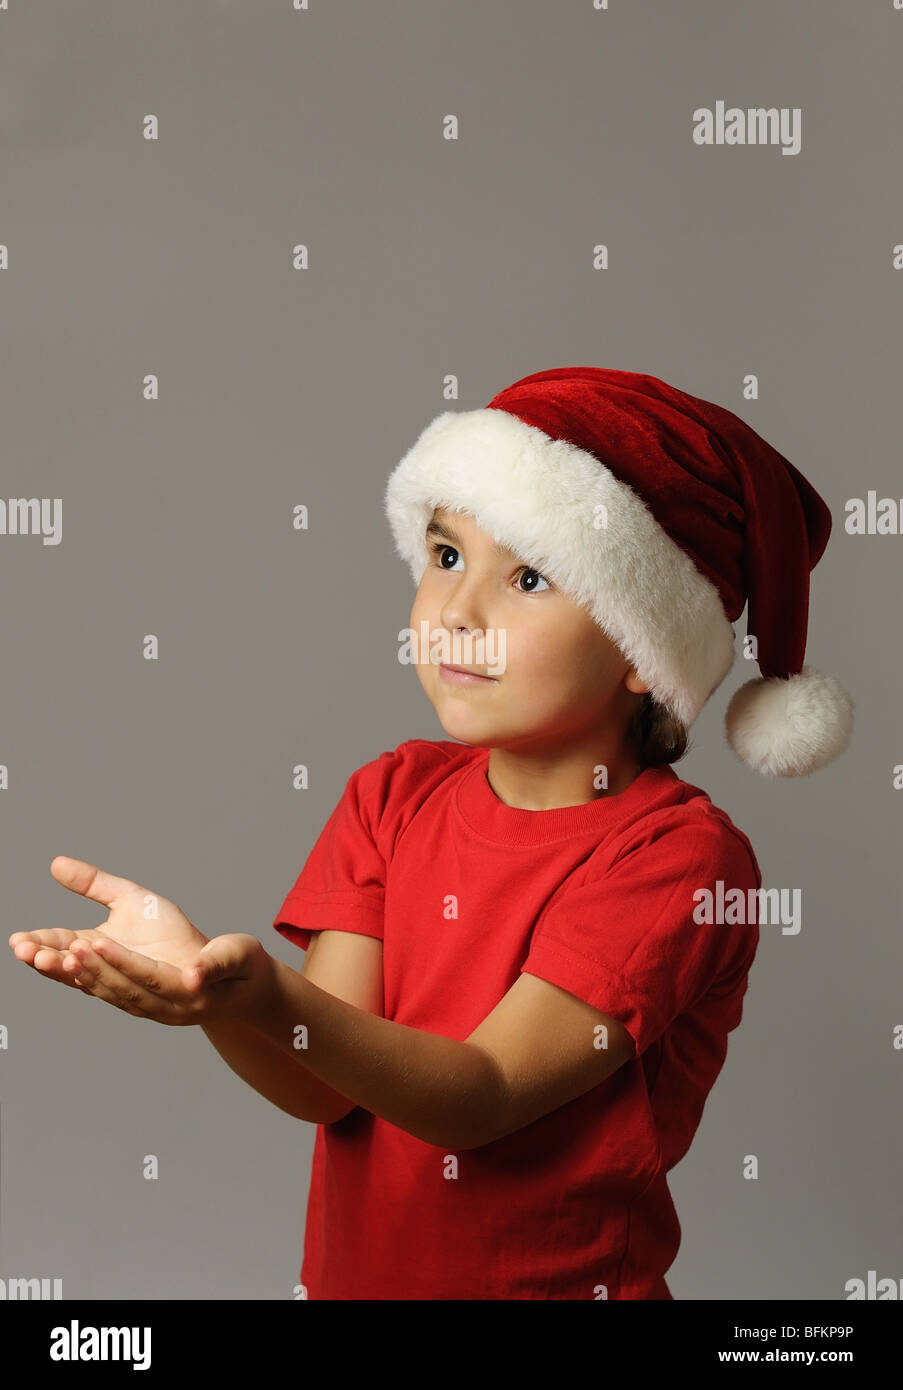 Kid in Santa hat and red t-shirt holding an imaginary gift Stock Photo